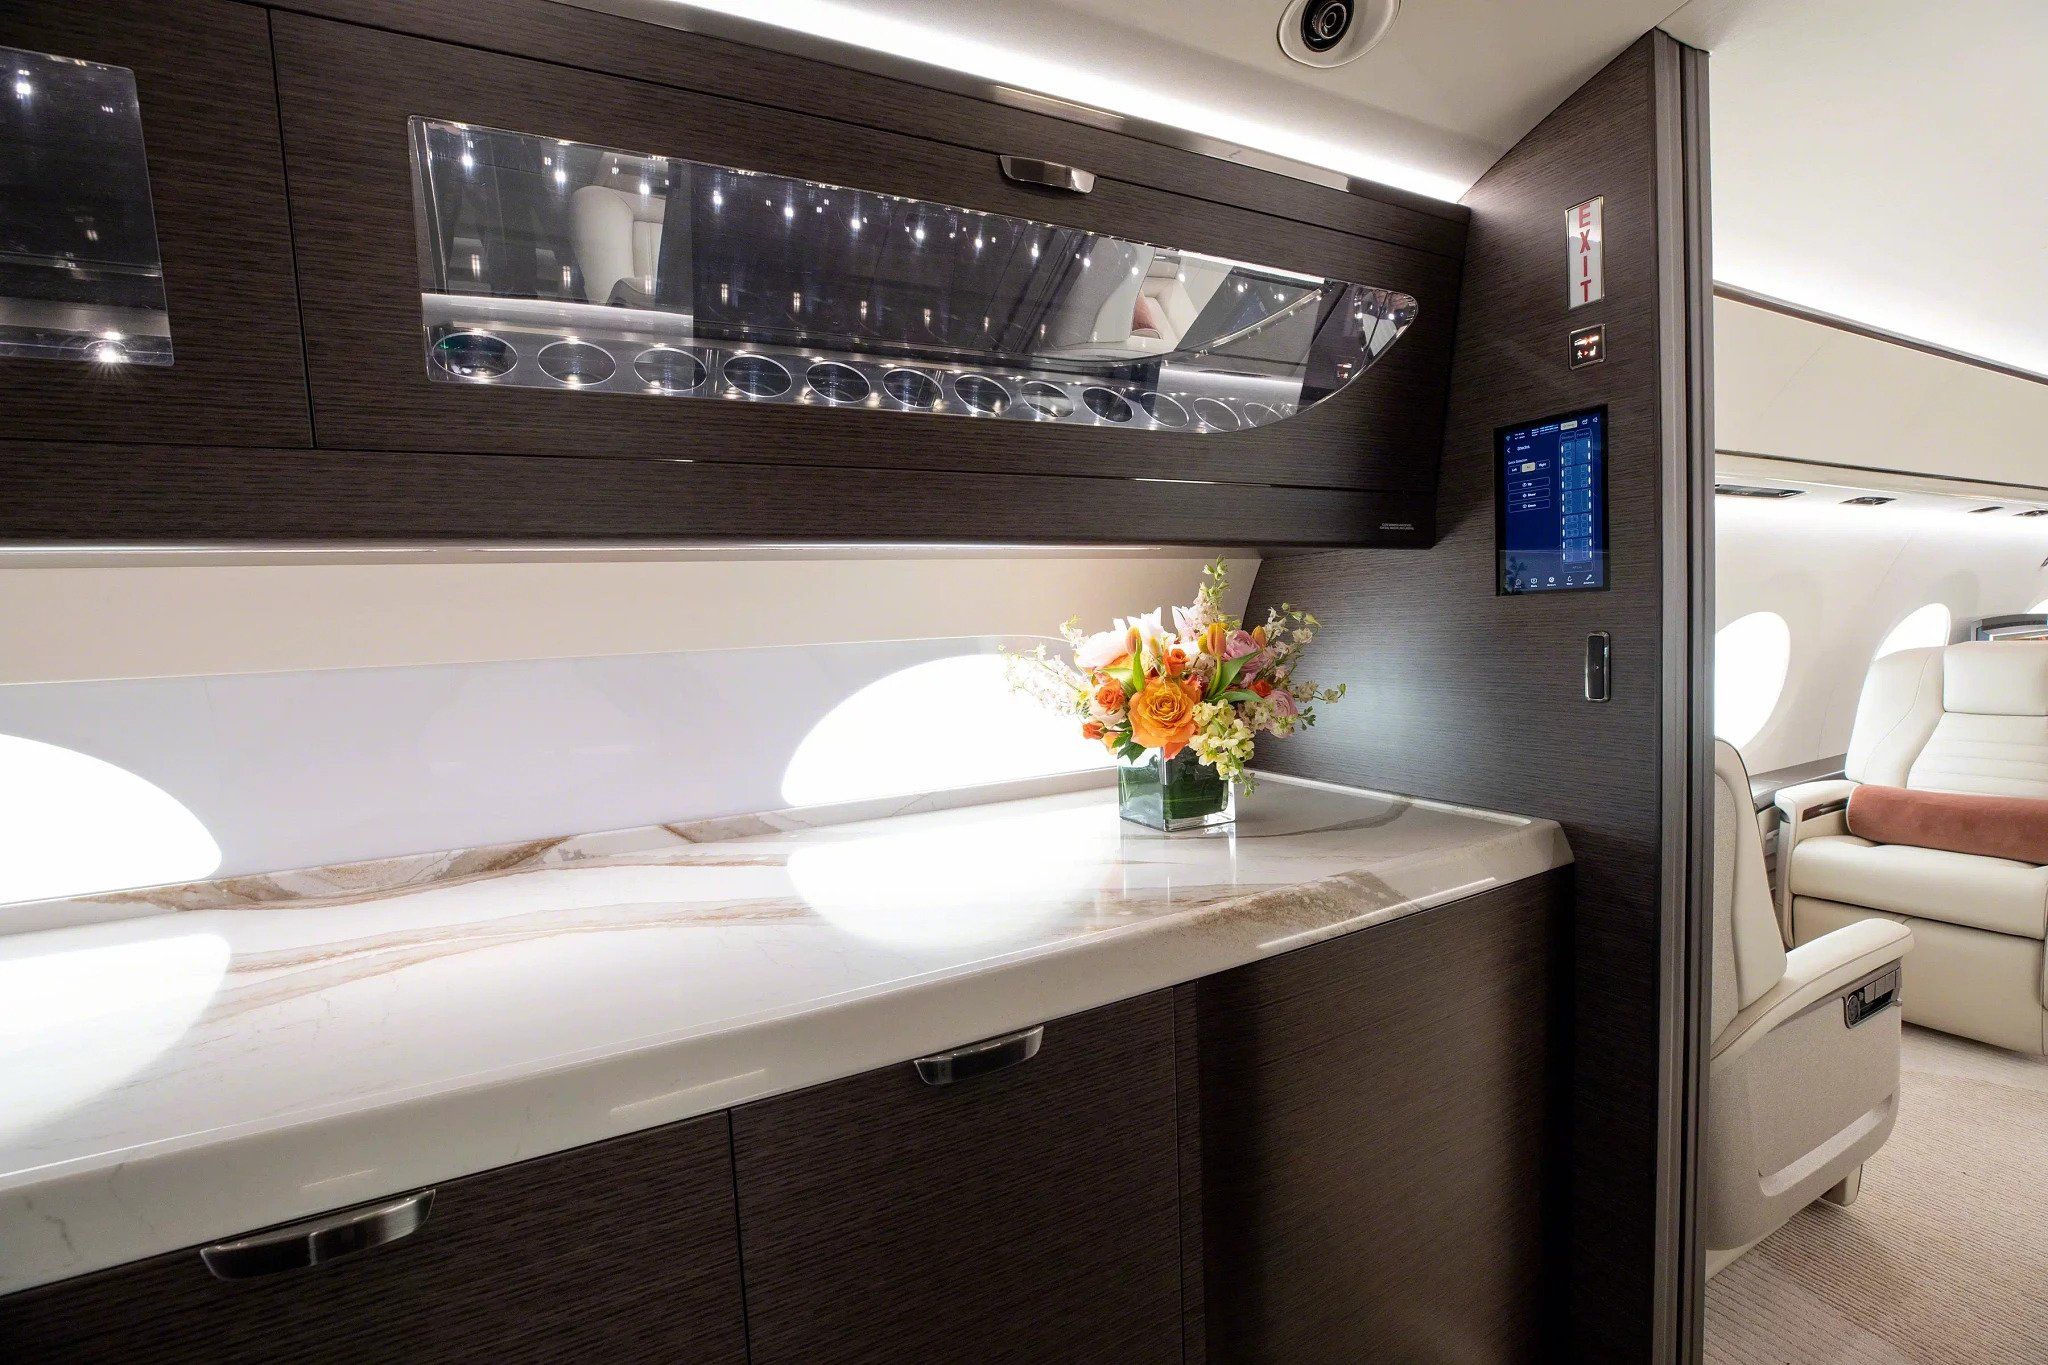 The galley area of a Gulfstream G700.